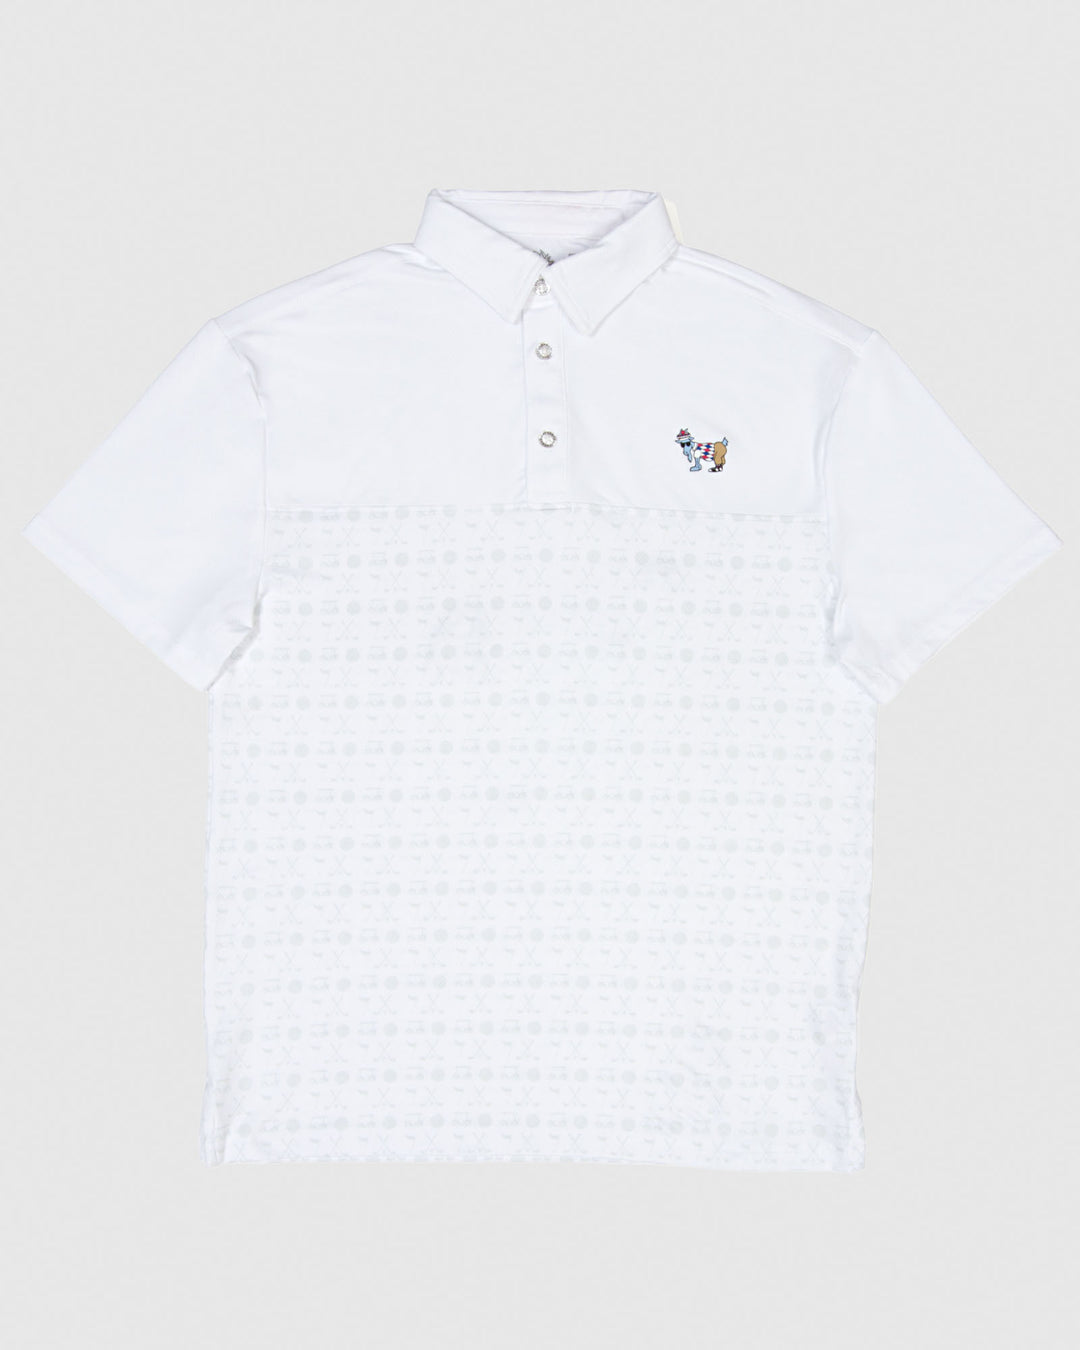 White polo with subtle gray golf design and golf goat